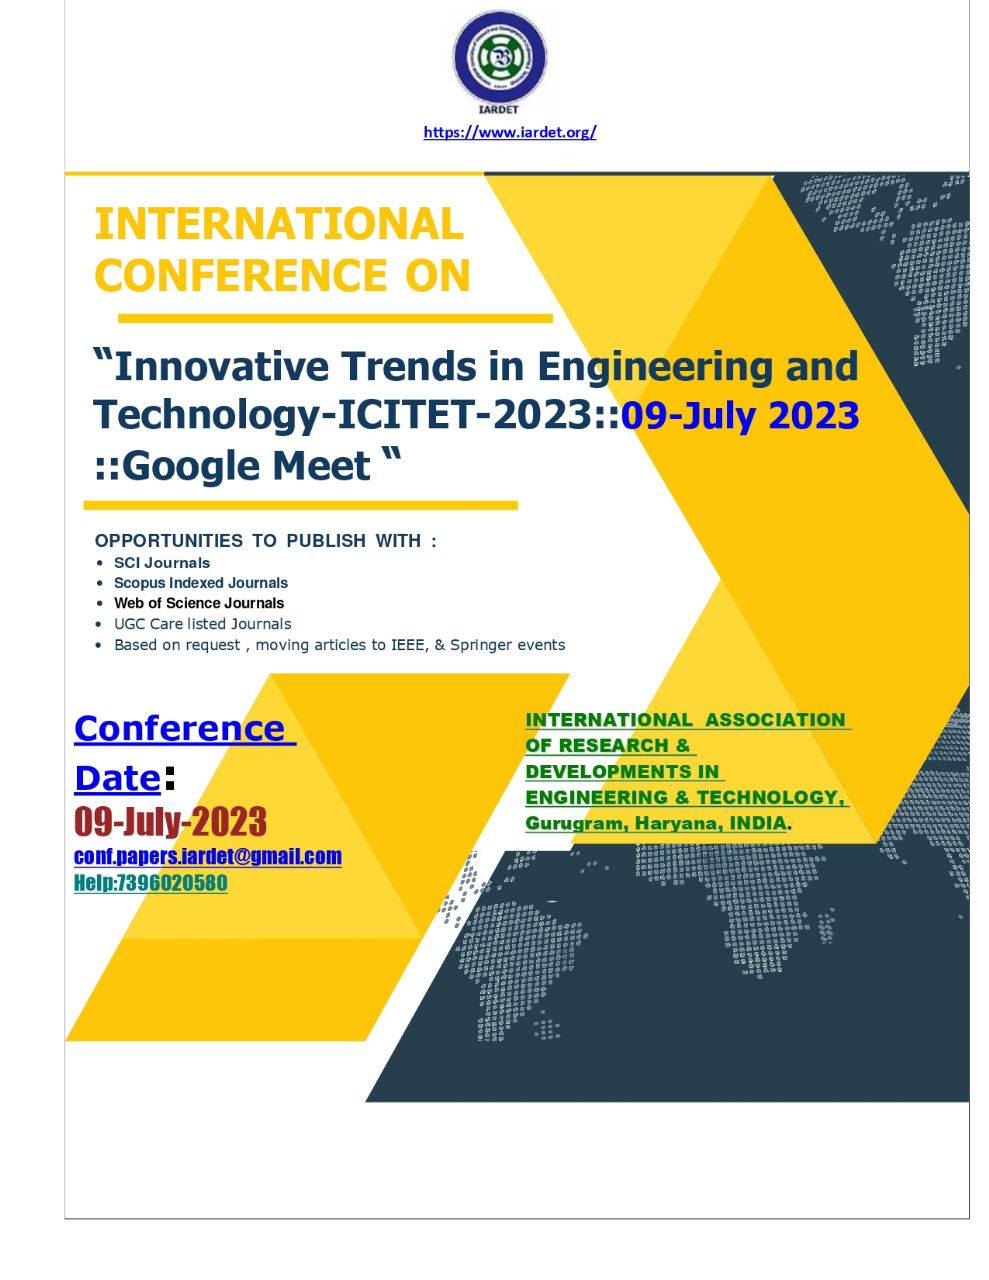 Virtual International Conference on Innovative Trends in Engineering and Technology ICITET 2023